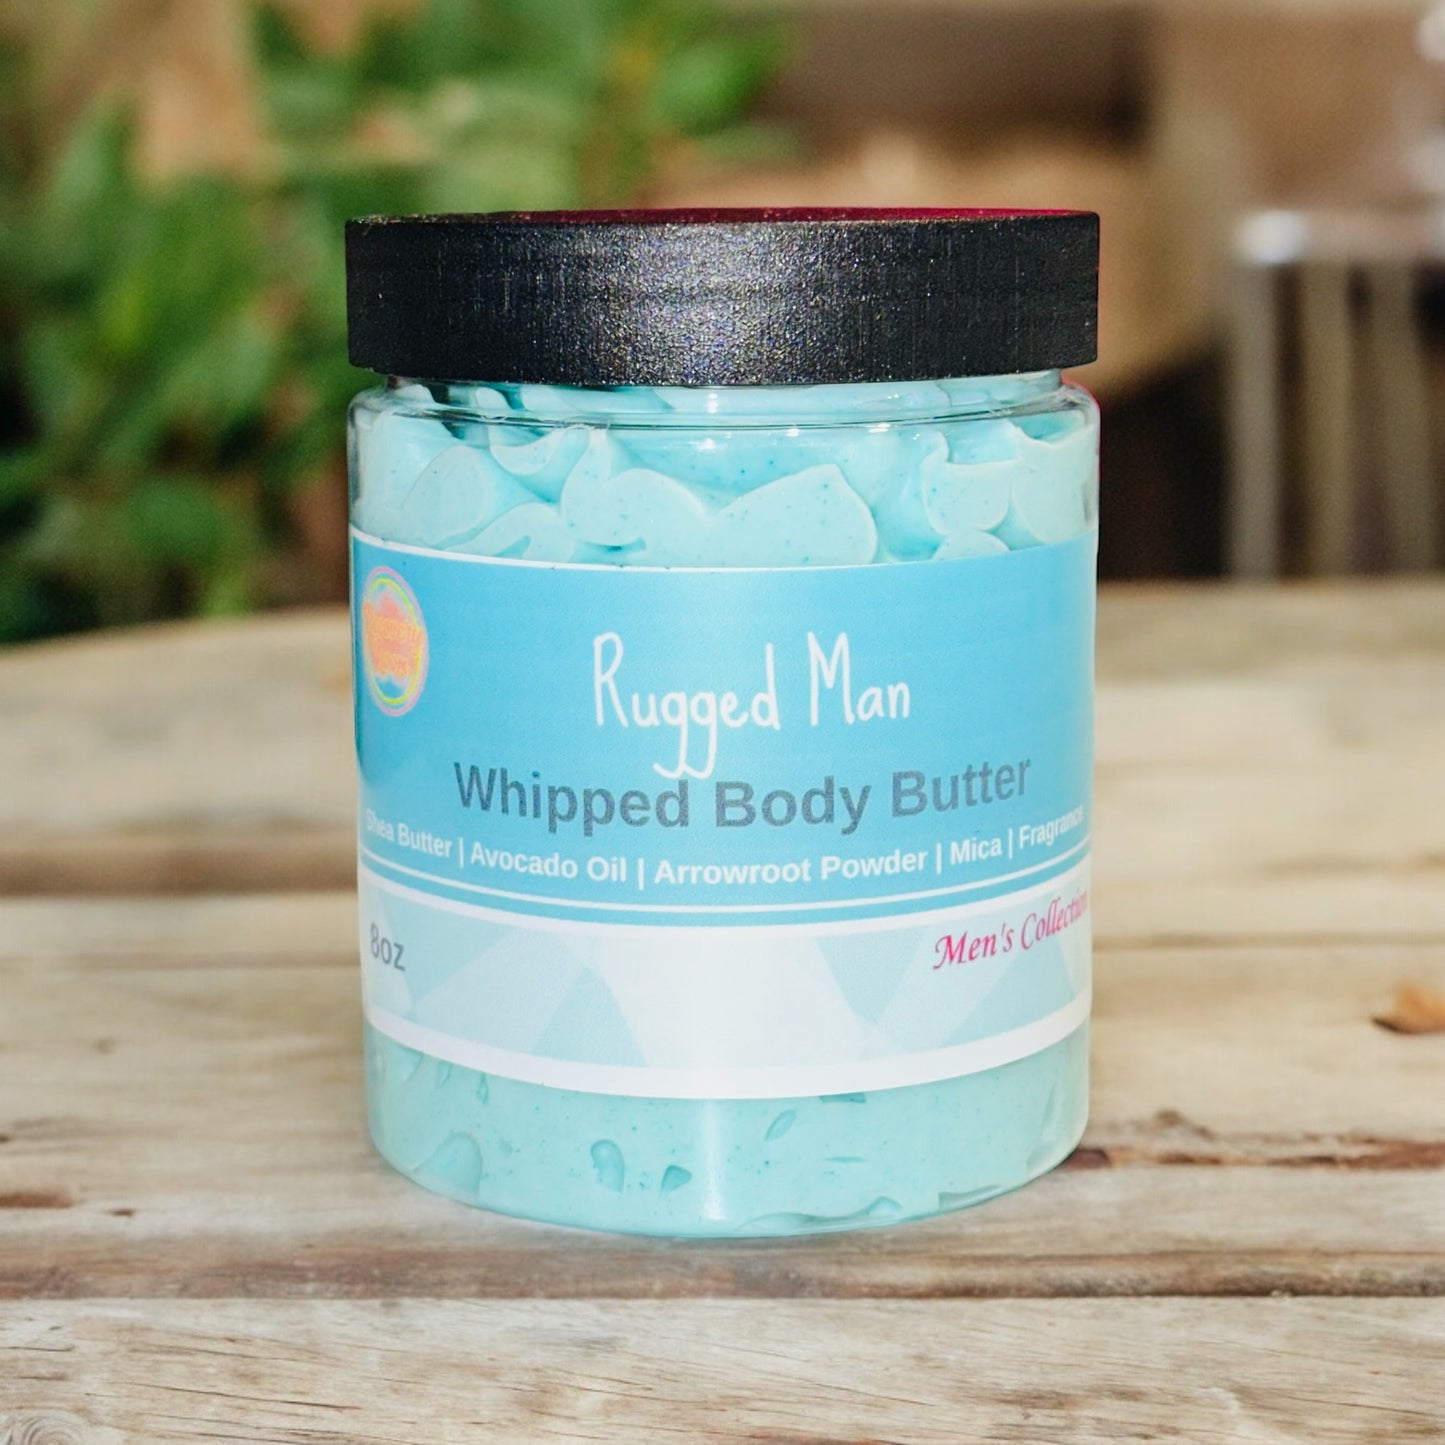 Rugged Man Whipped Body Butter